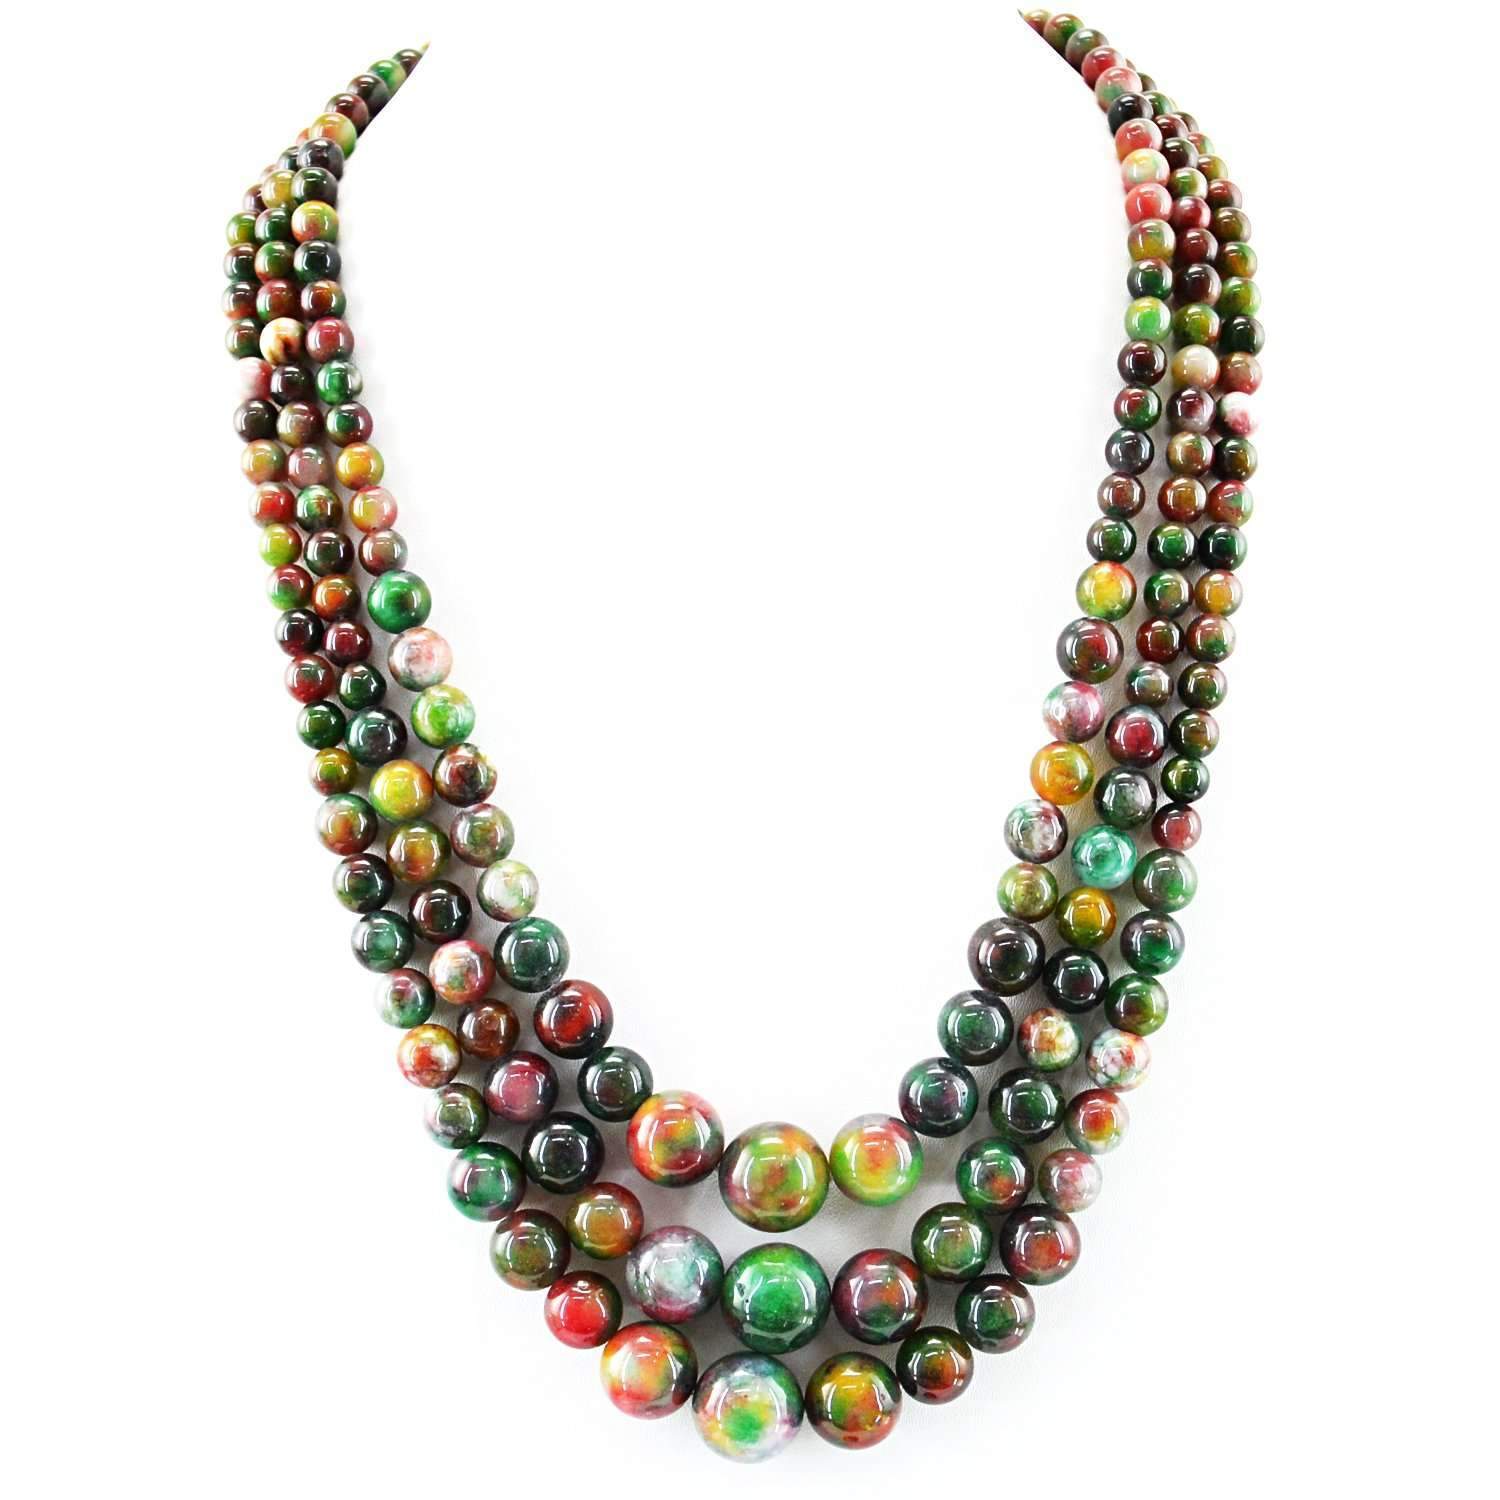 gemsmore:Natural Multicolor Onyx Necklace 3 Strand Round Shape Beads